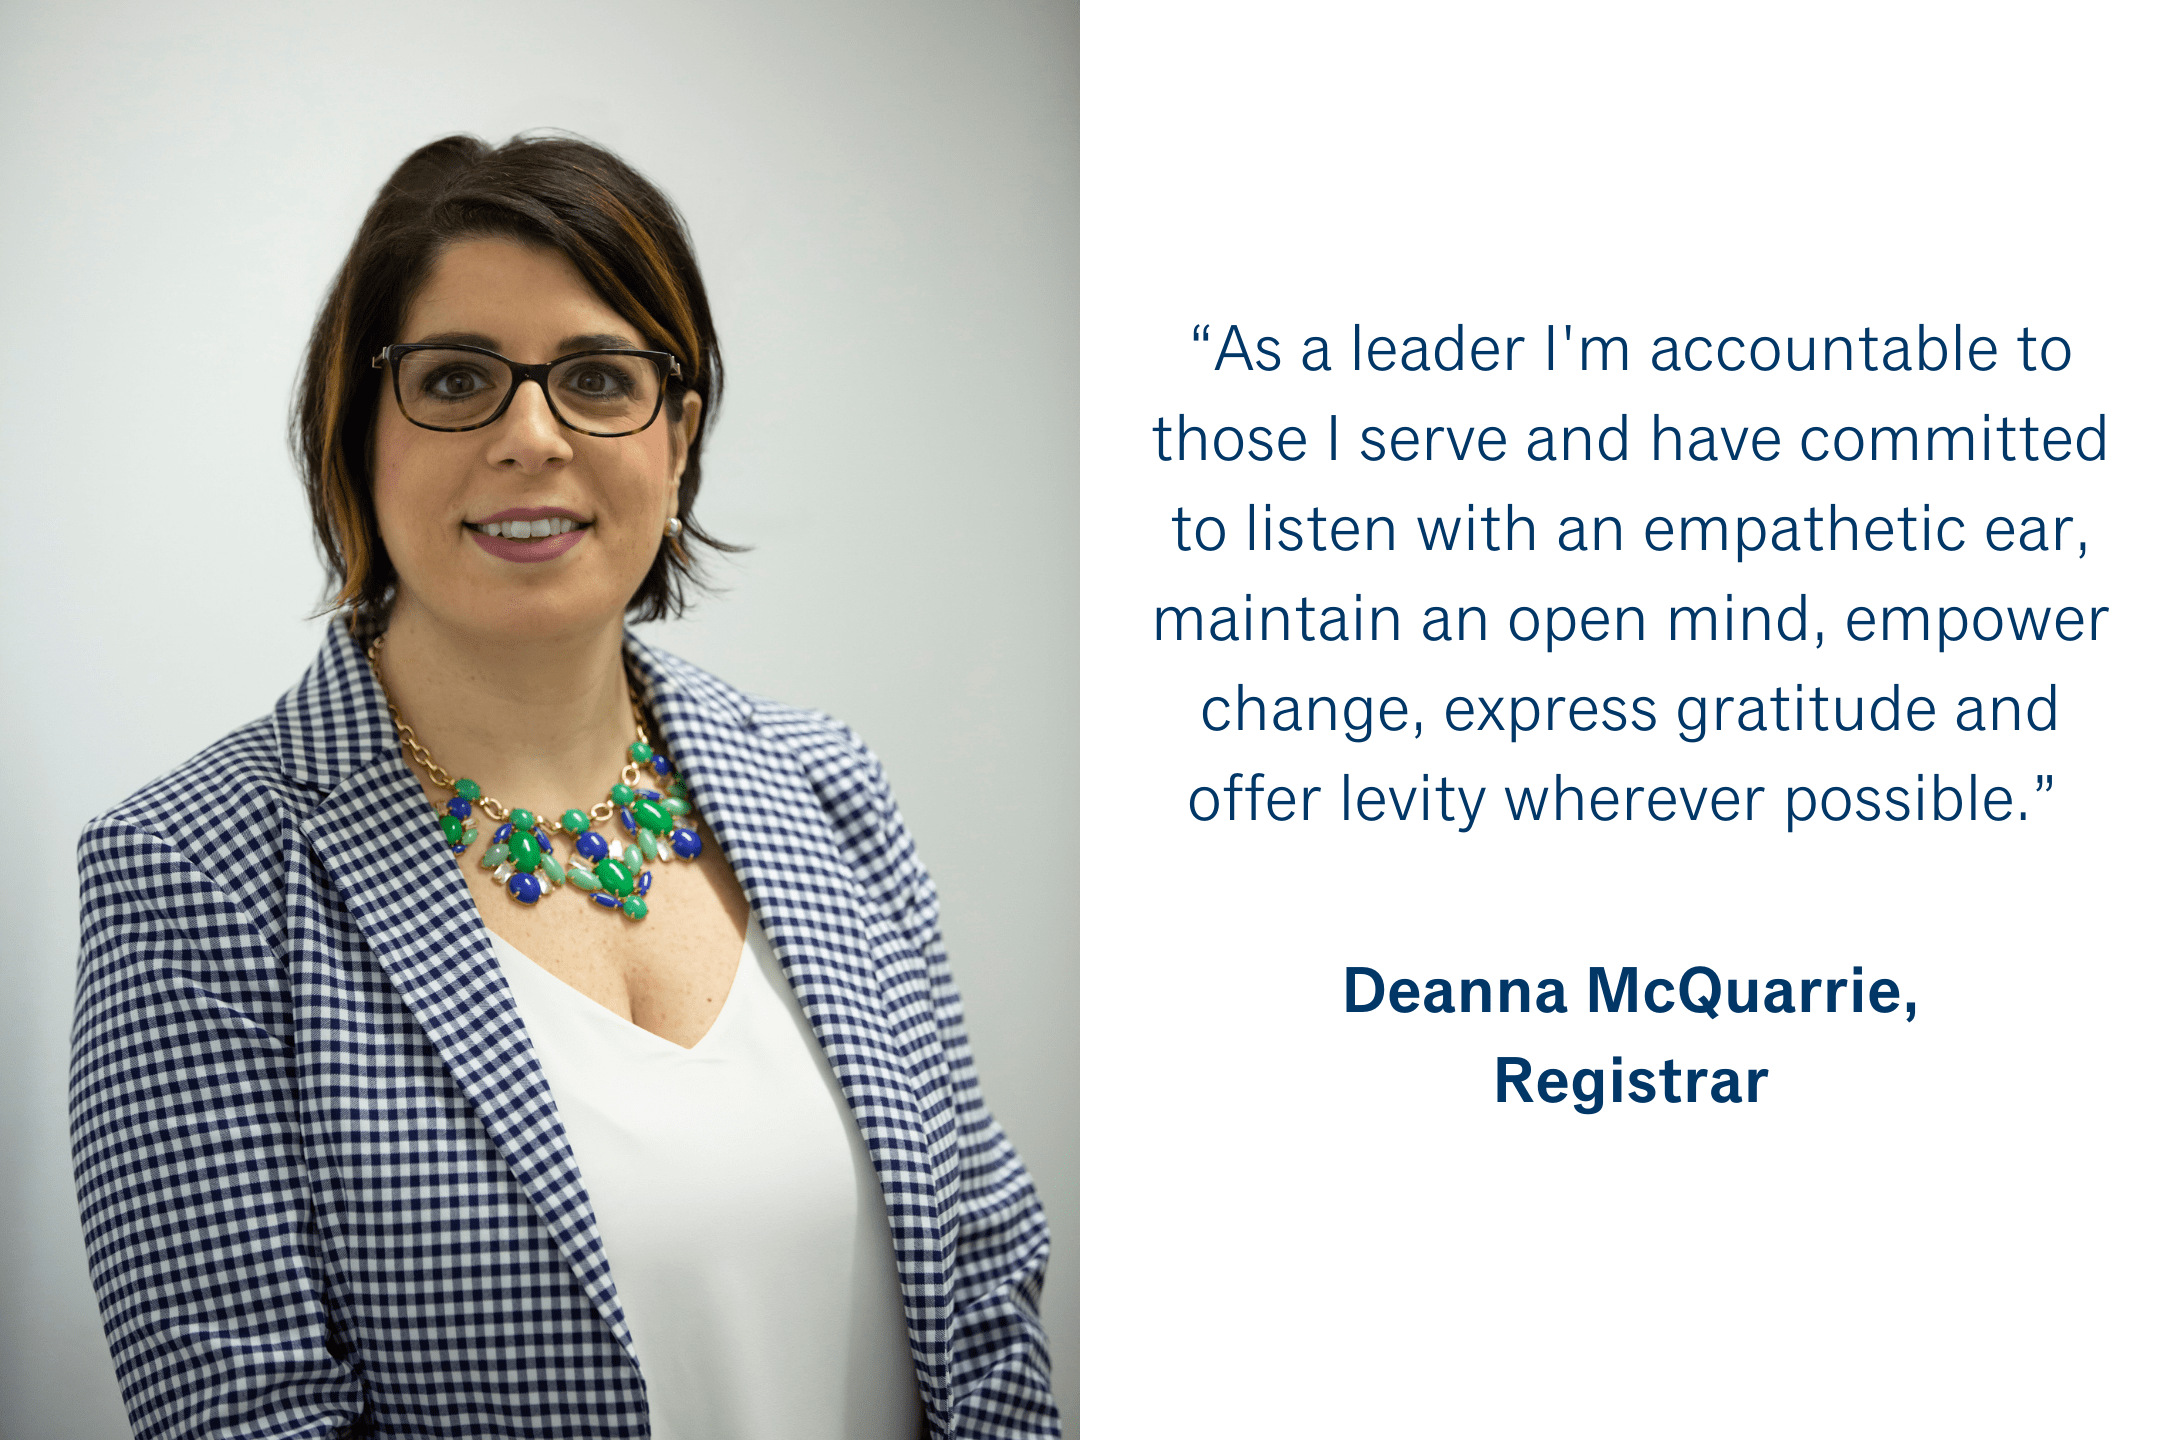 “As a leader I'm accountable to those I serve and have committed to listen with an empathetic ear, maintain an open mind, empower change, express gratitude and offer levity wherever possible.” Deanna McQuarrie, Registrar